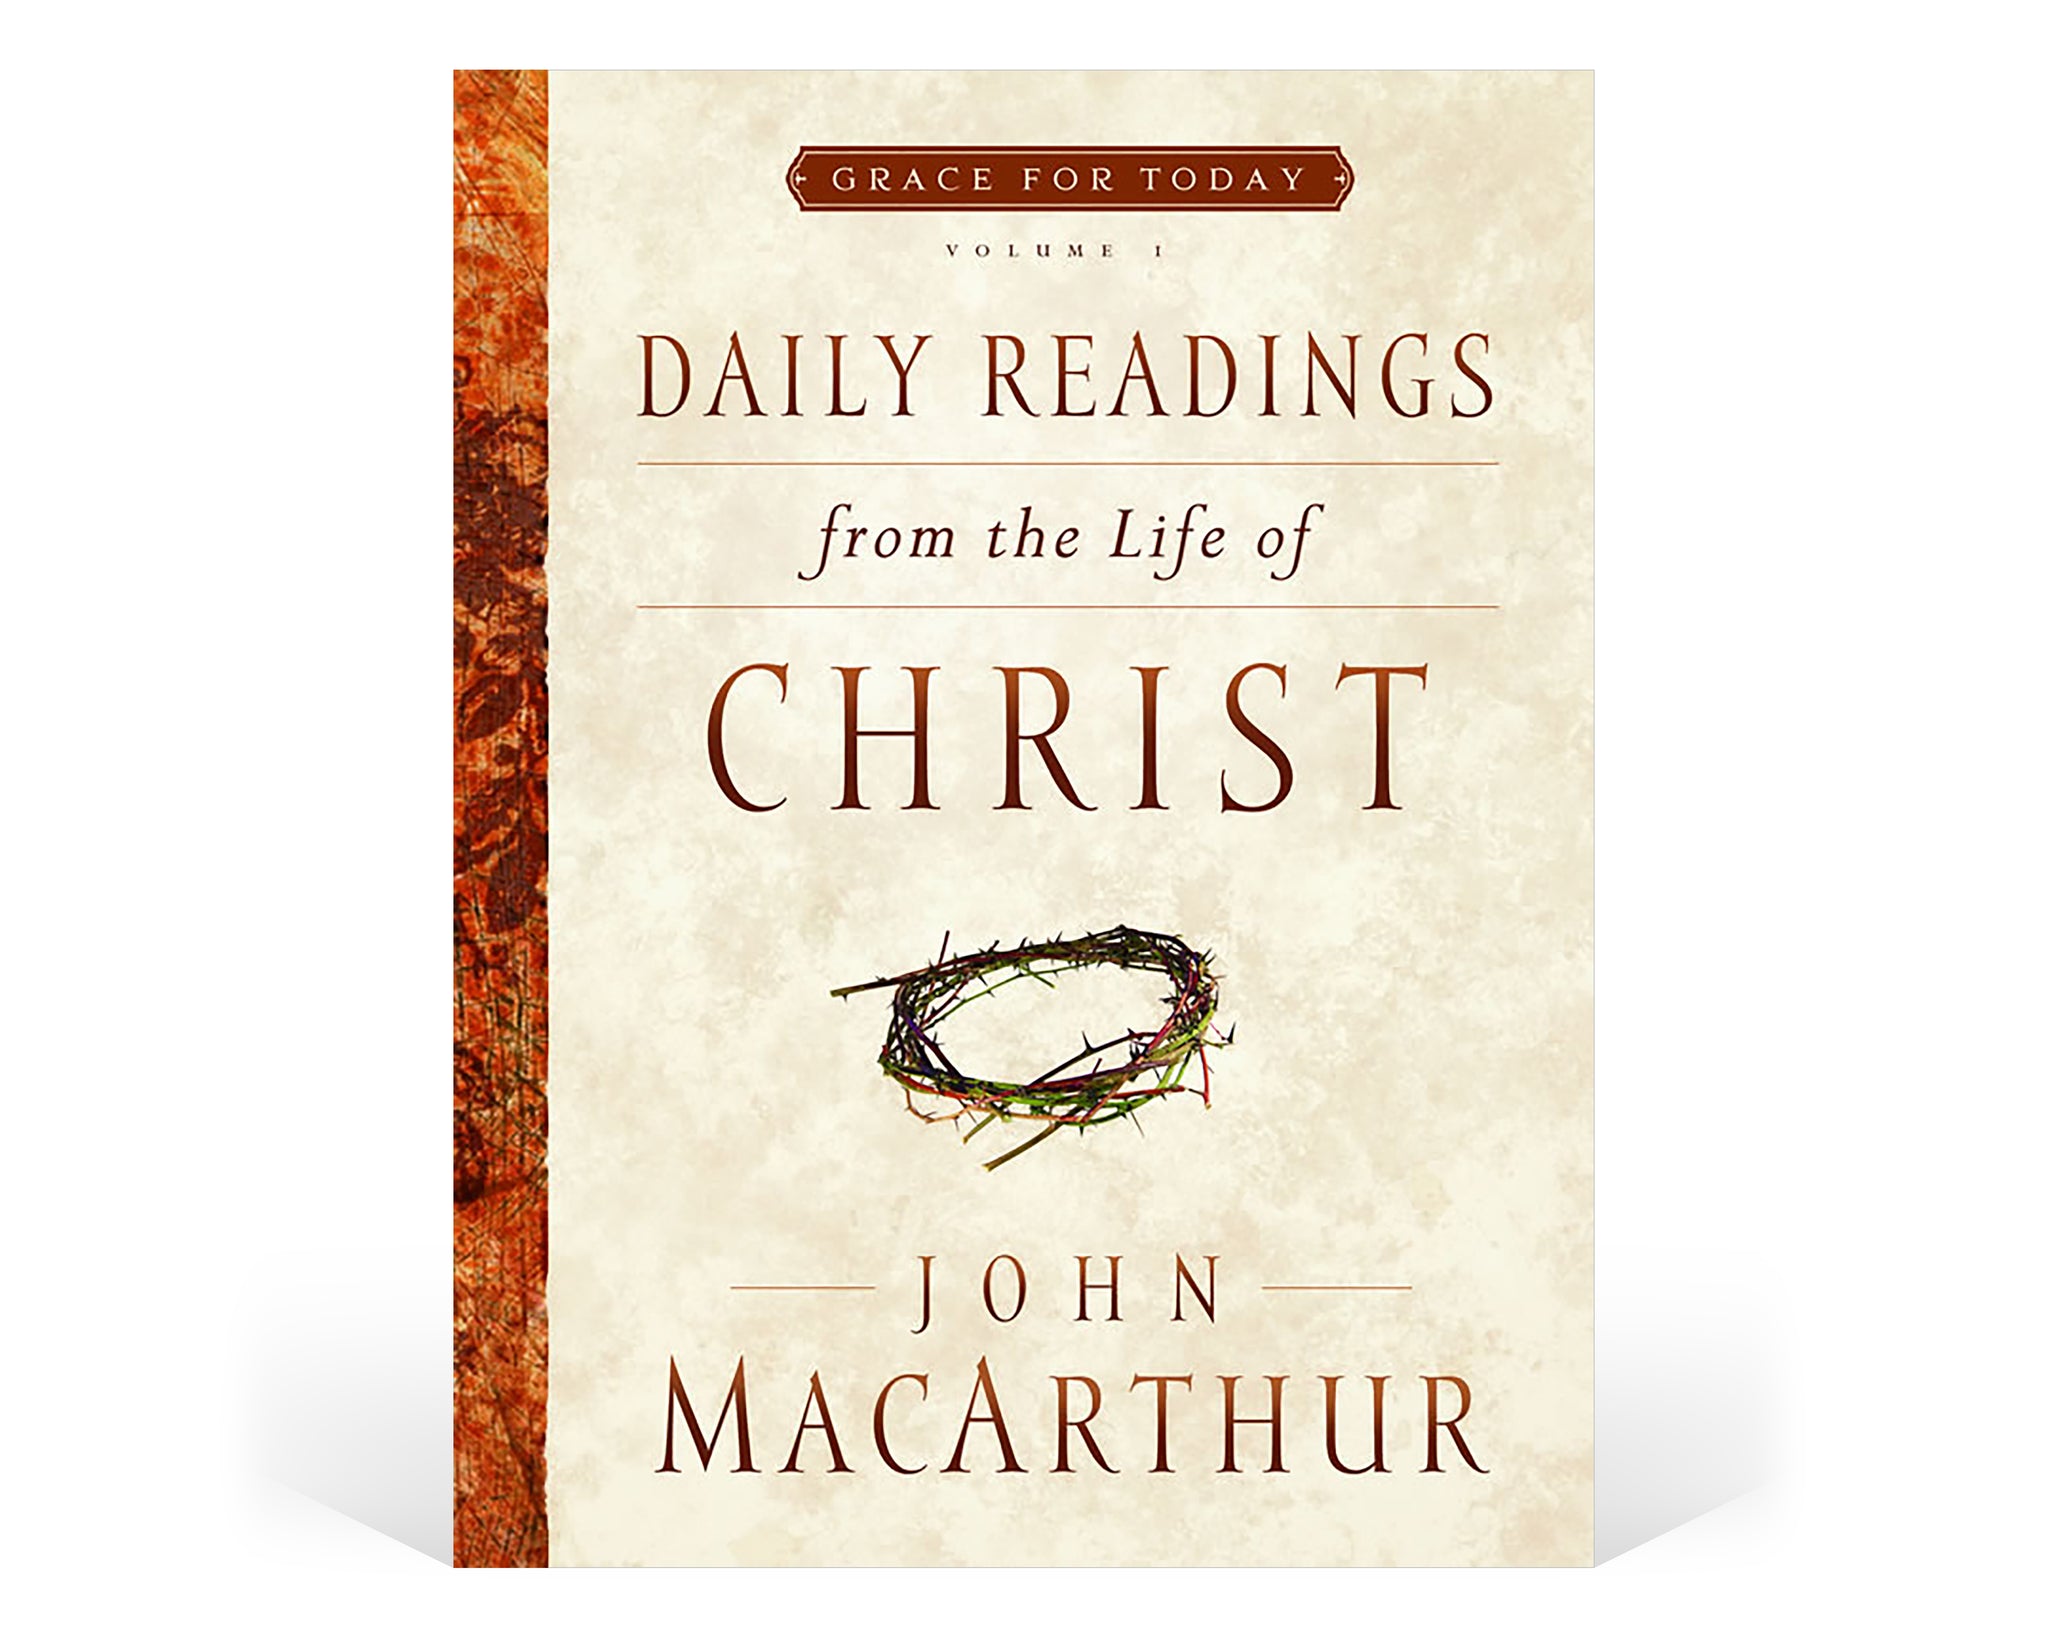 Daily Readings from the Life of Christ, Vol. 1